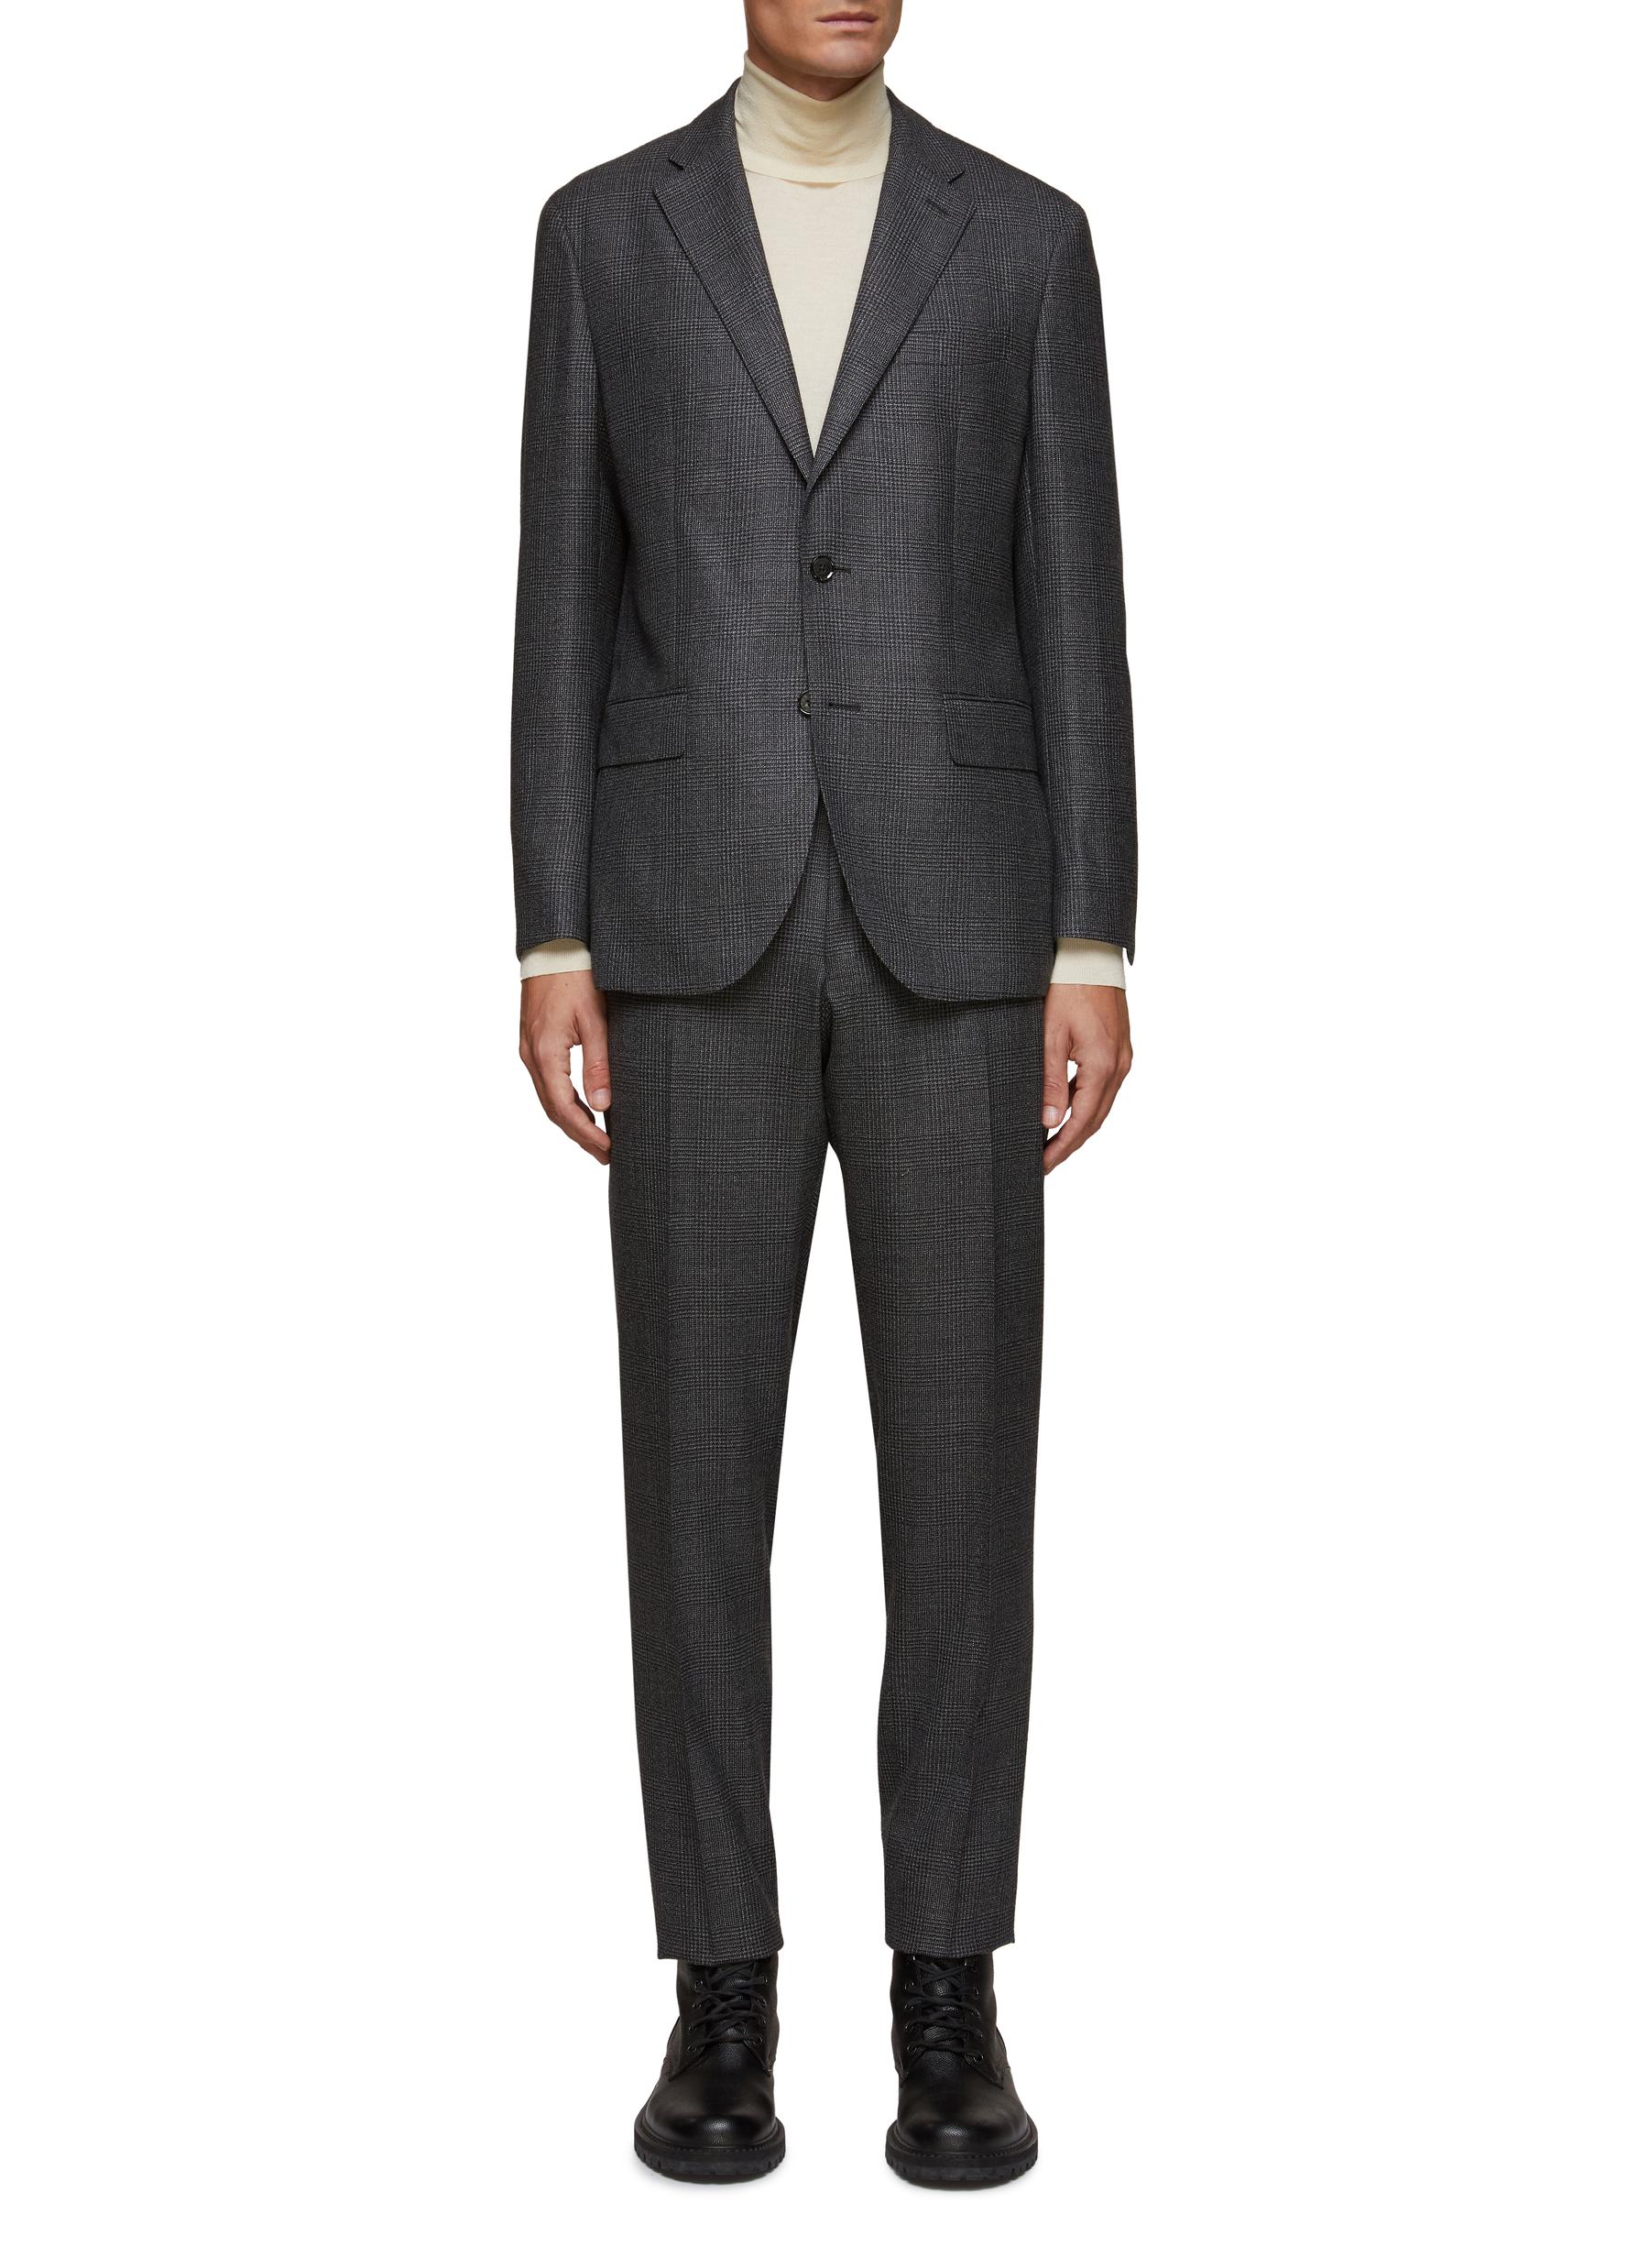 Equil Single Breasted Notch Lapel Glen Plaid Unlined Suit In Grey